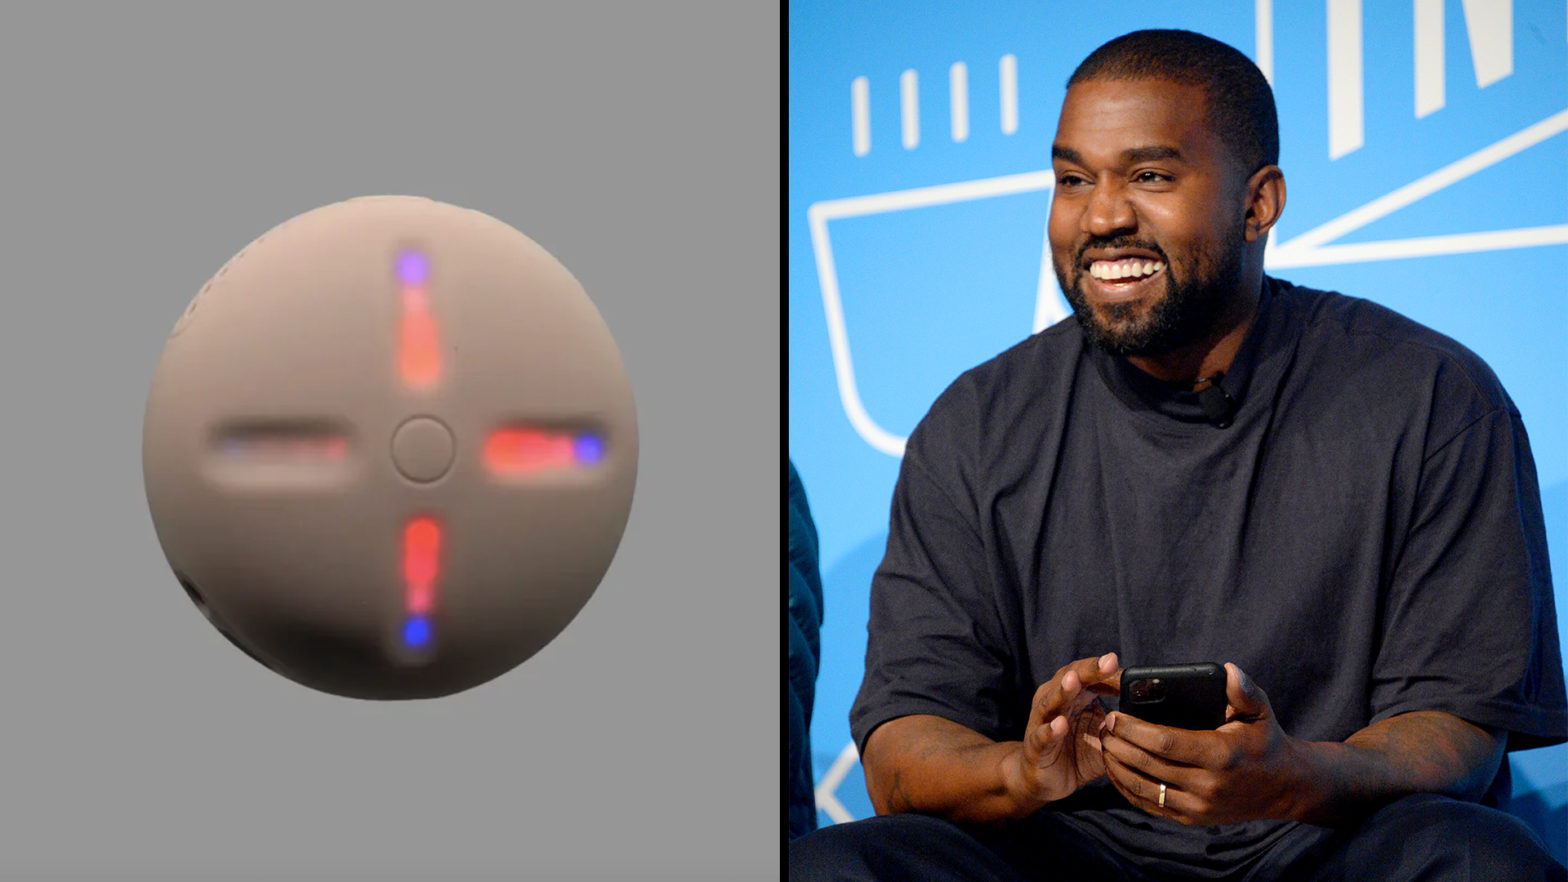 Kanye West Says His Stem Player, 'The First Yeezy Tech Product,' Brought In $2.2M In One Day